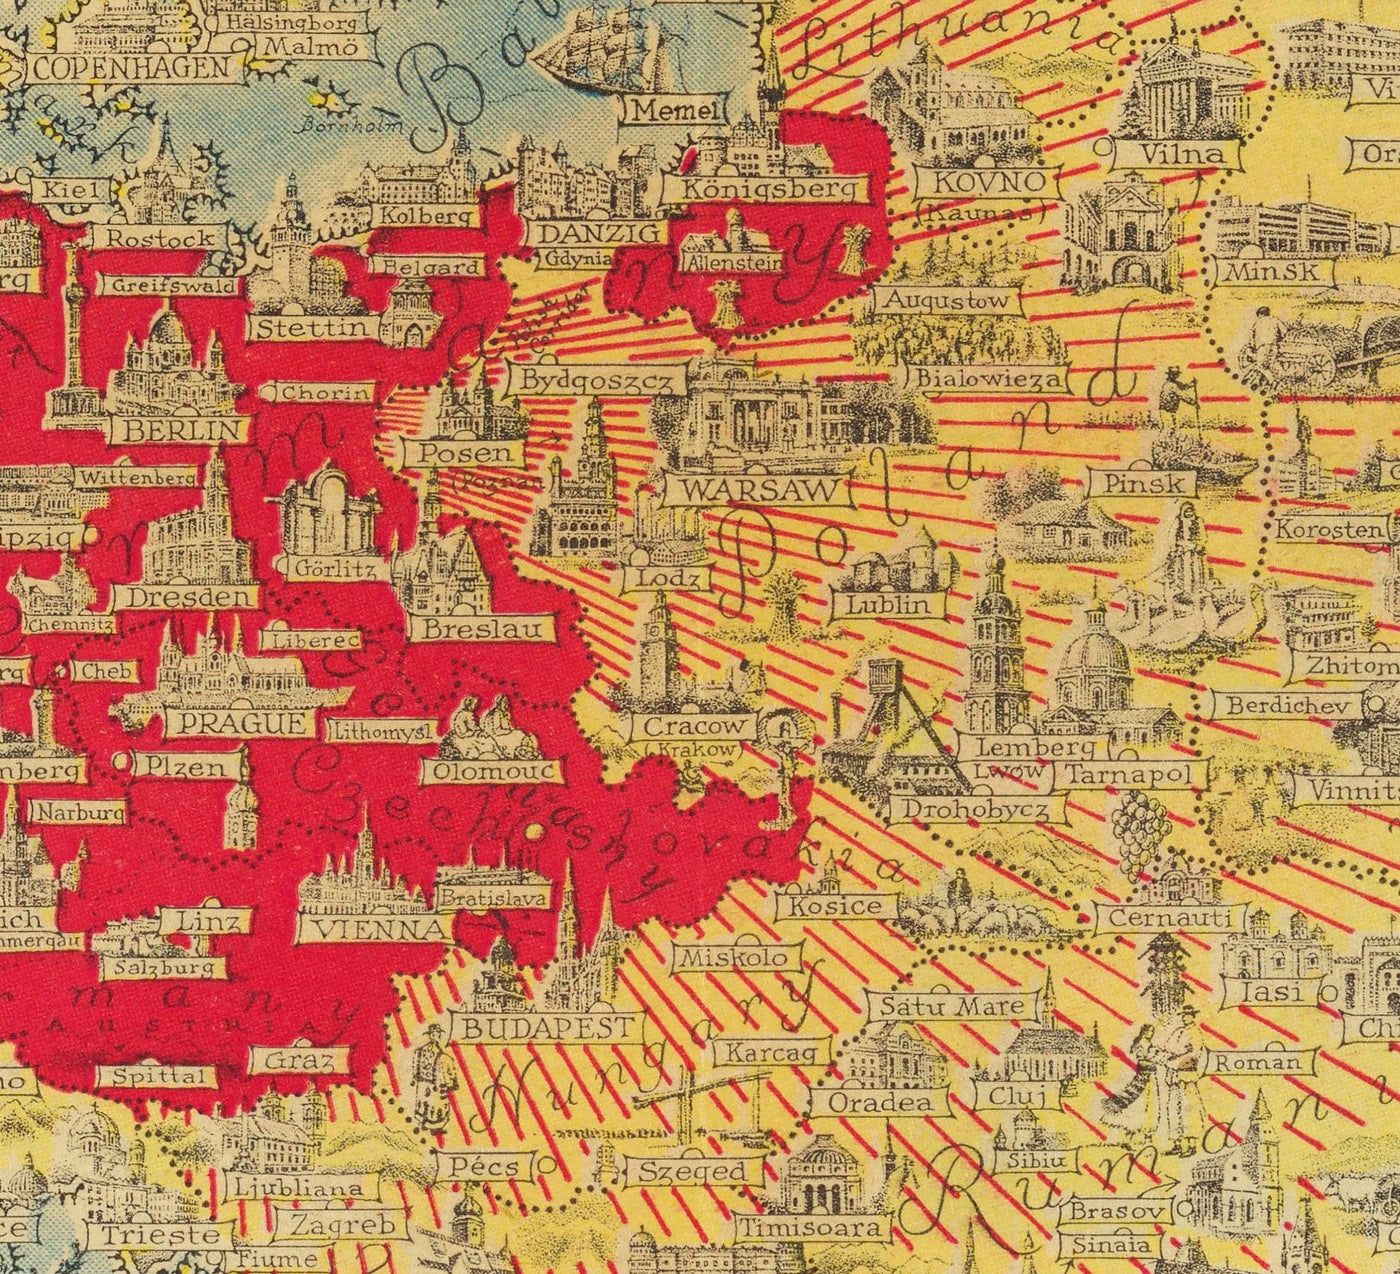 World War 2 Map, 1939 by Ernest Dudley Chase - Hitler's Dream of Expansion - Nazi Germany Territory